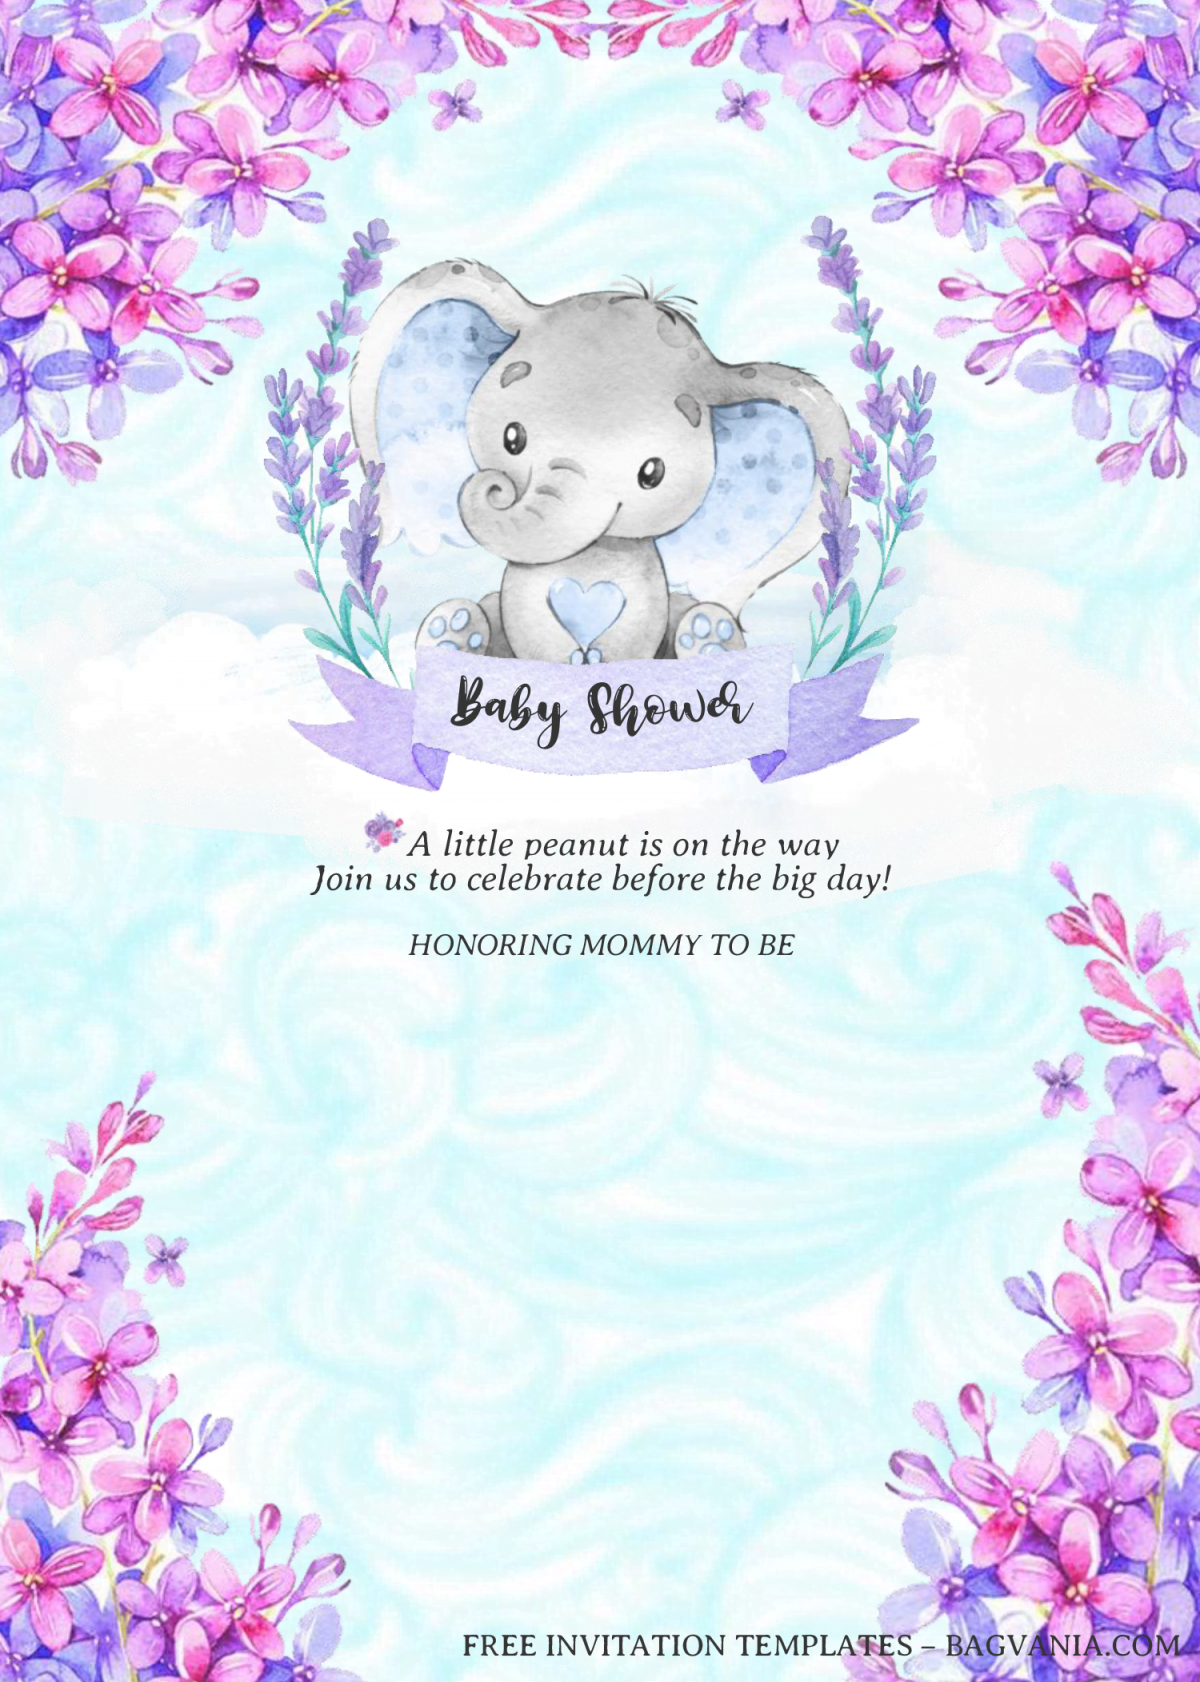 Watercolor Baby Elephant Invitation Templates - Editable With MS Word and has cute hand drawn baby elephant